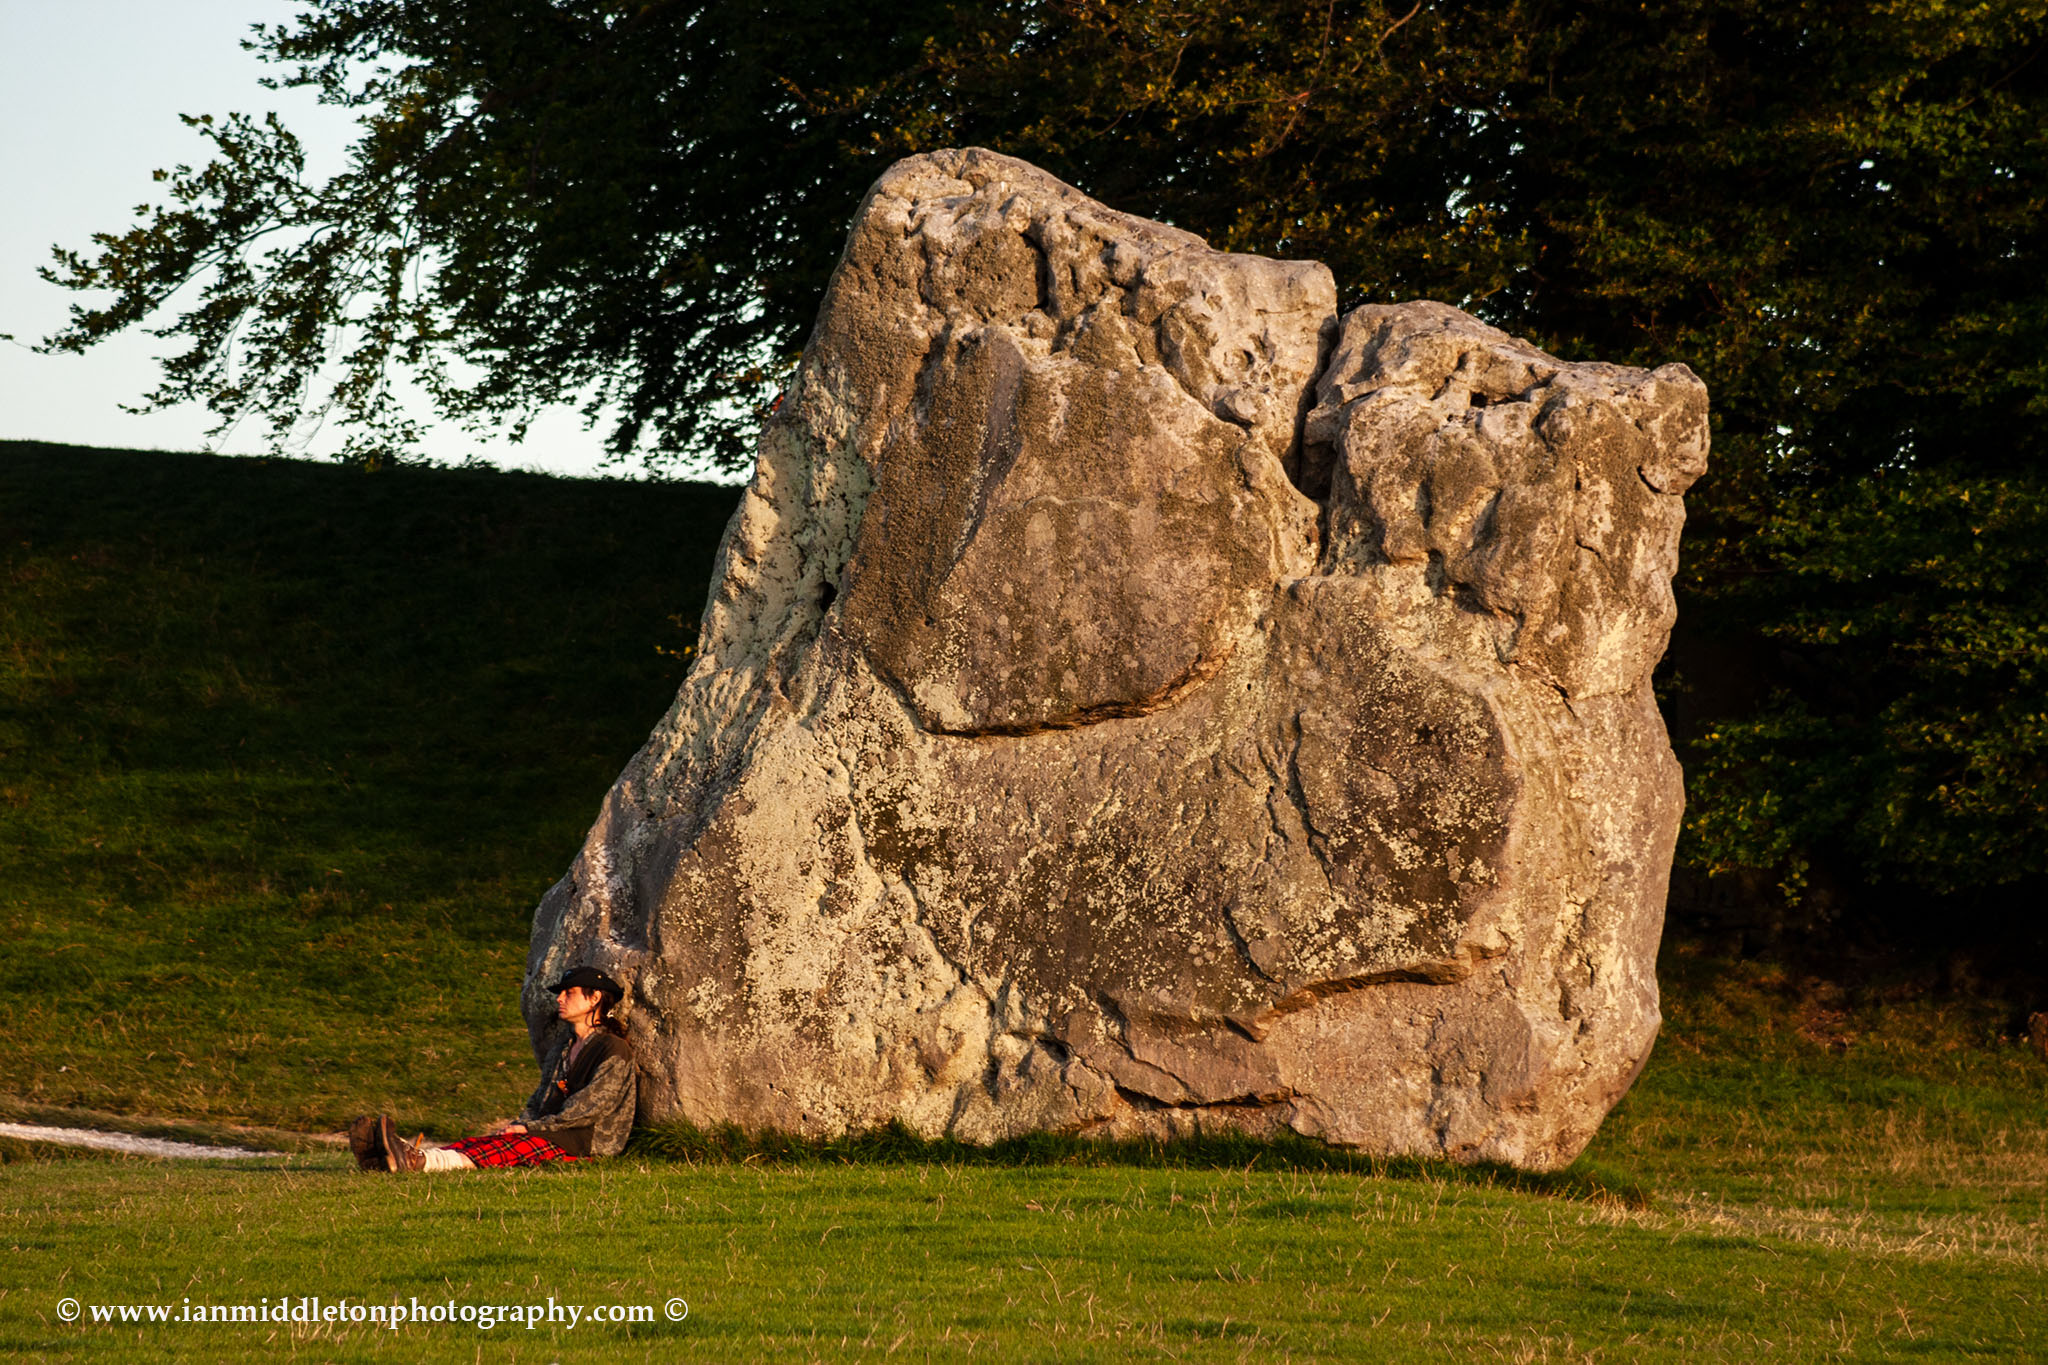 Man in kilt resting against a stone at Avebury Stone Circle in Wiltshire, England.